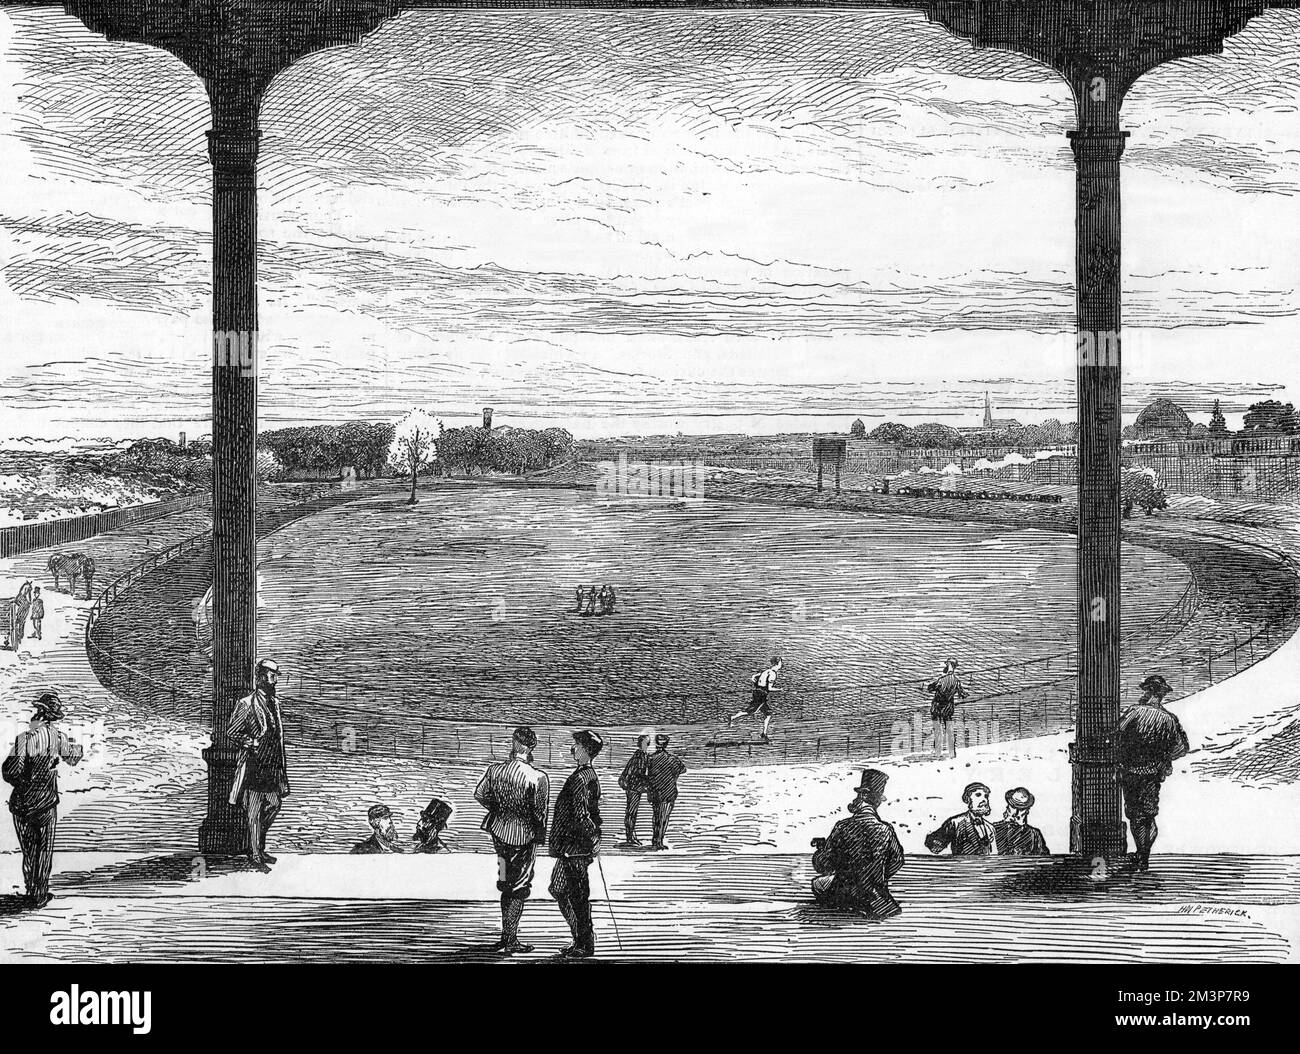 New grounds of the London Athletic Club at Stamford Bridge, Fulham in London.     Date: 1877 Stock Photo